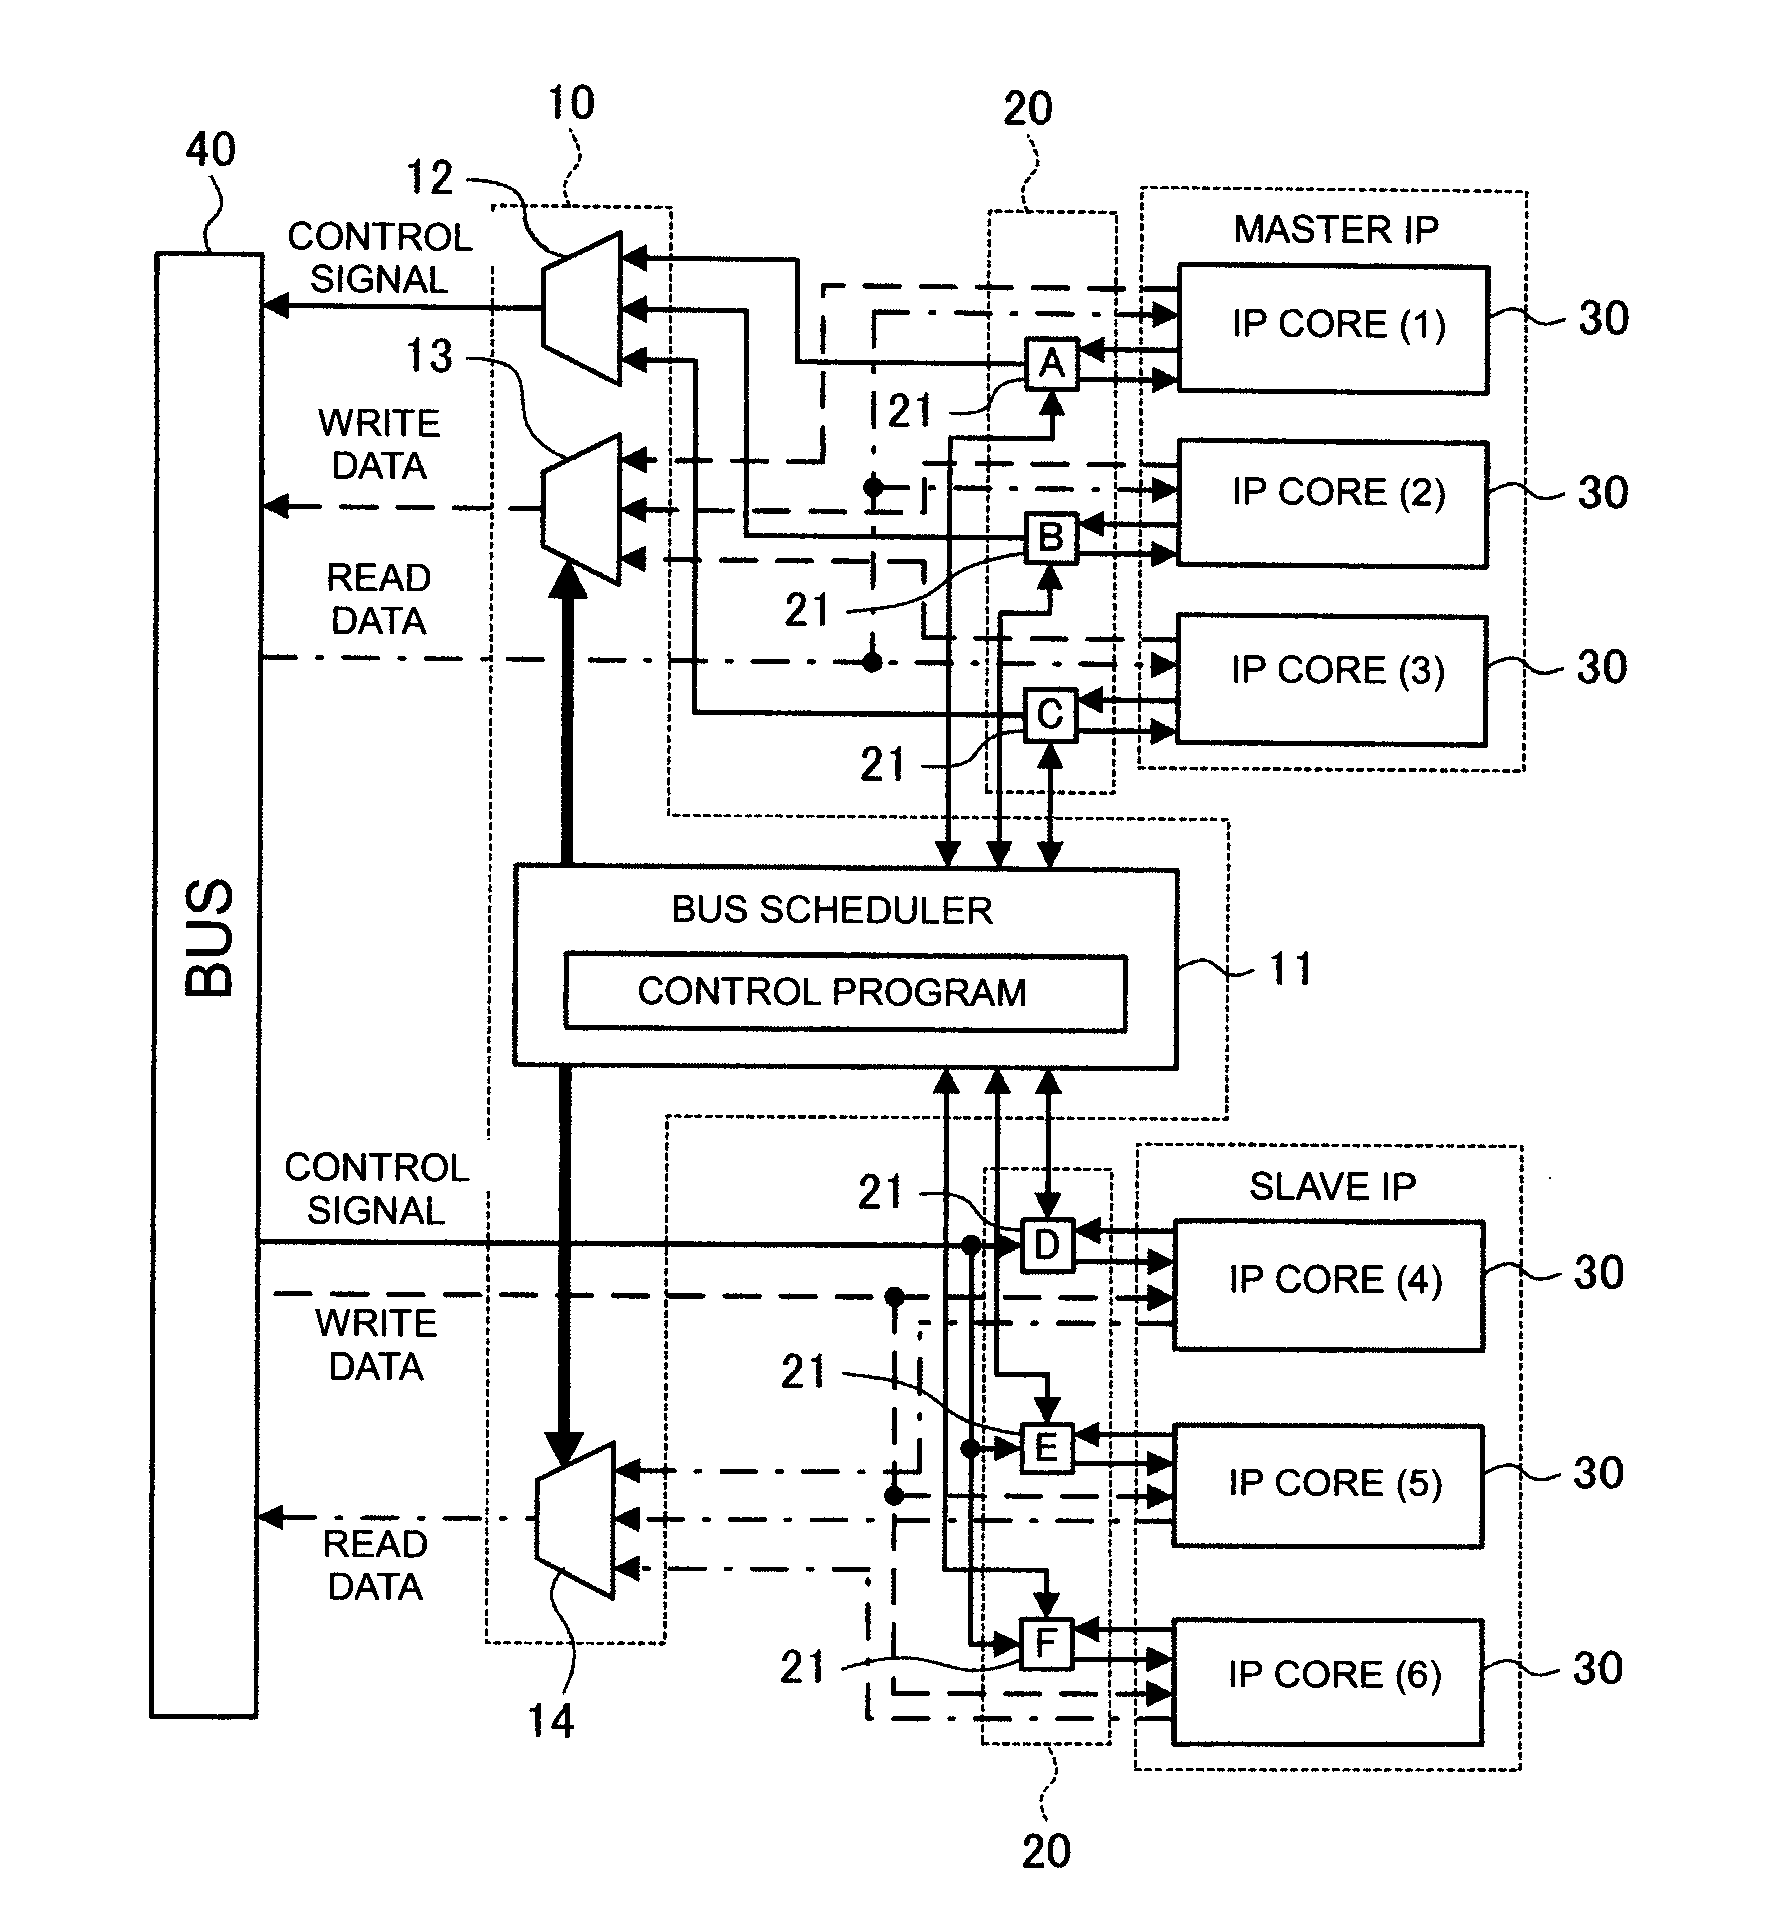 Bus access control apparatus and method